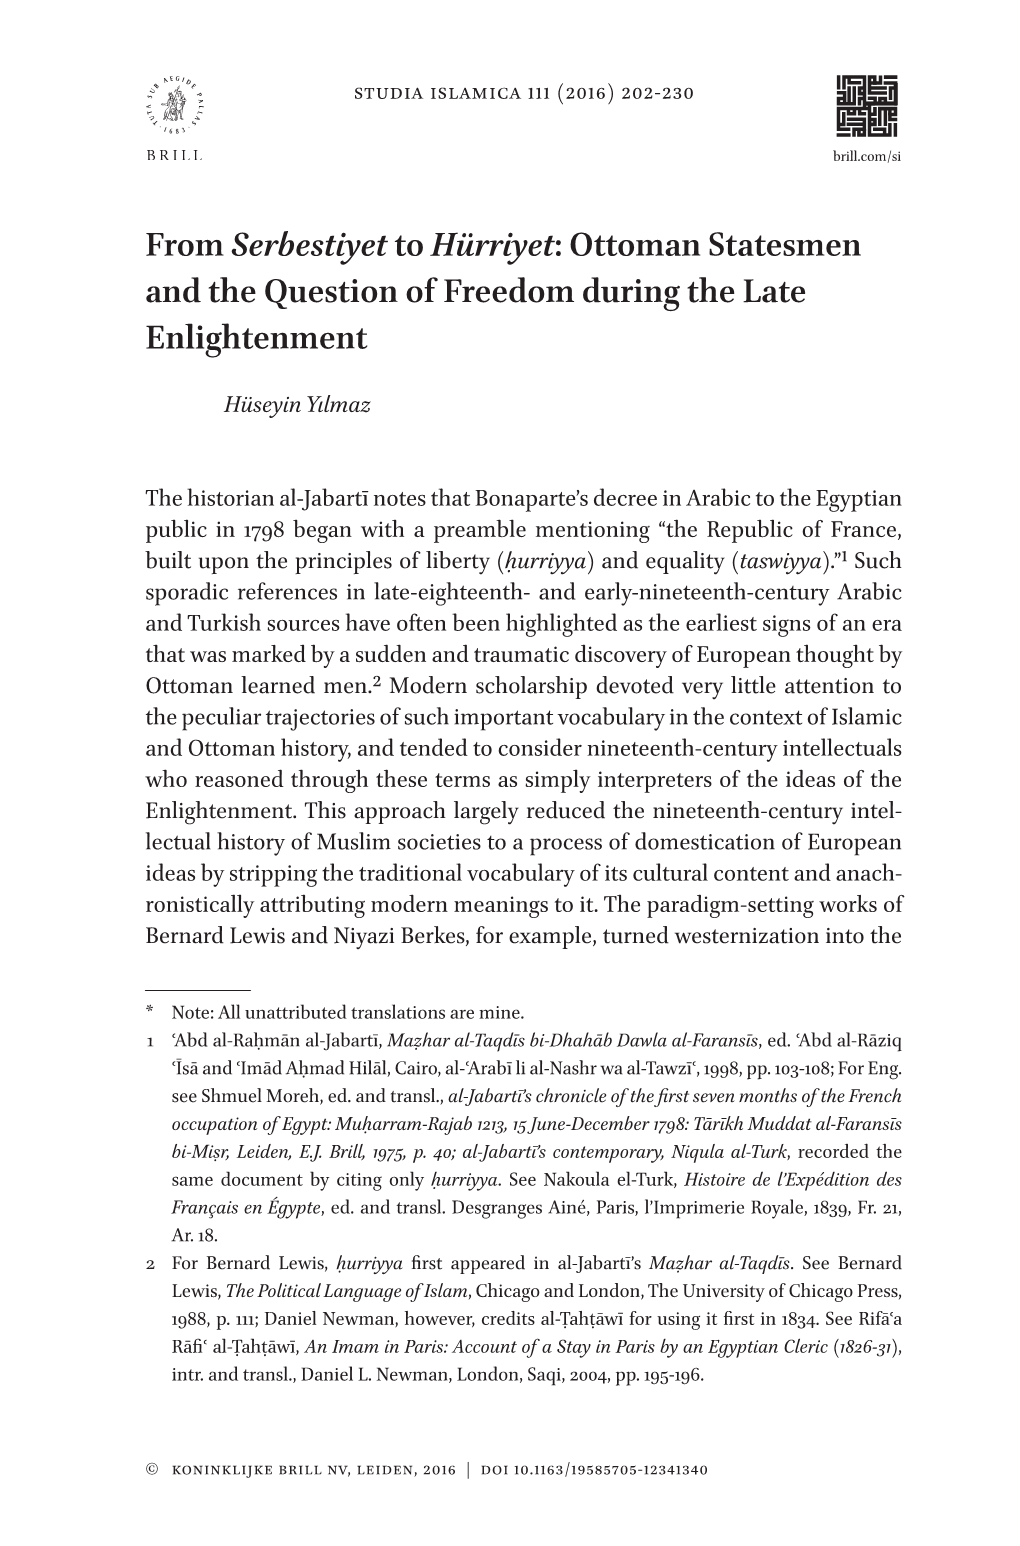 Ottoman Statesmen and the Question of Freedom During the Late Enlightenment